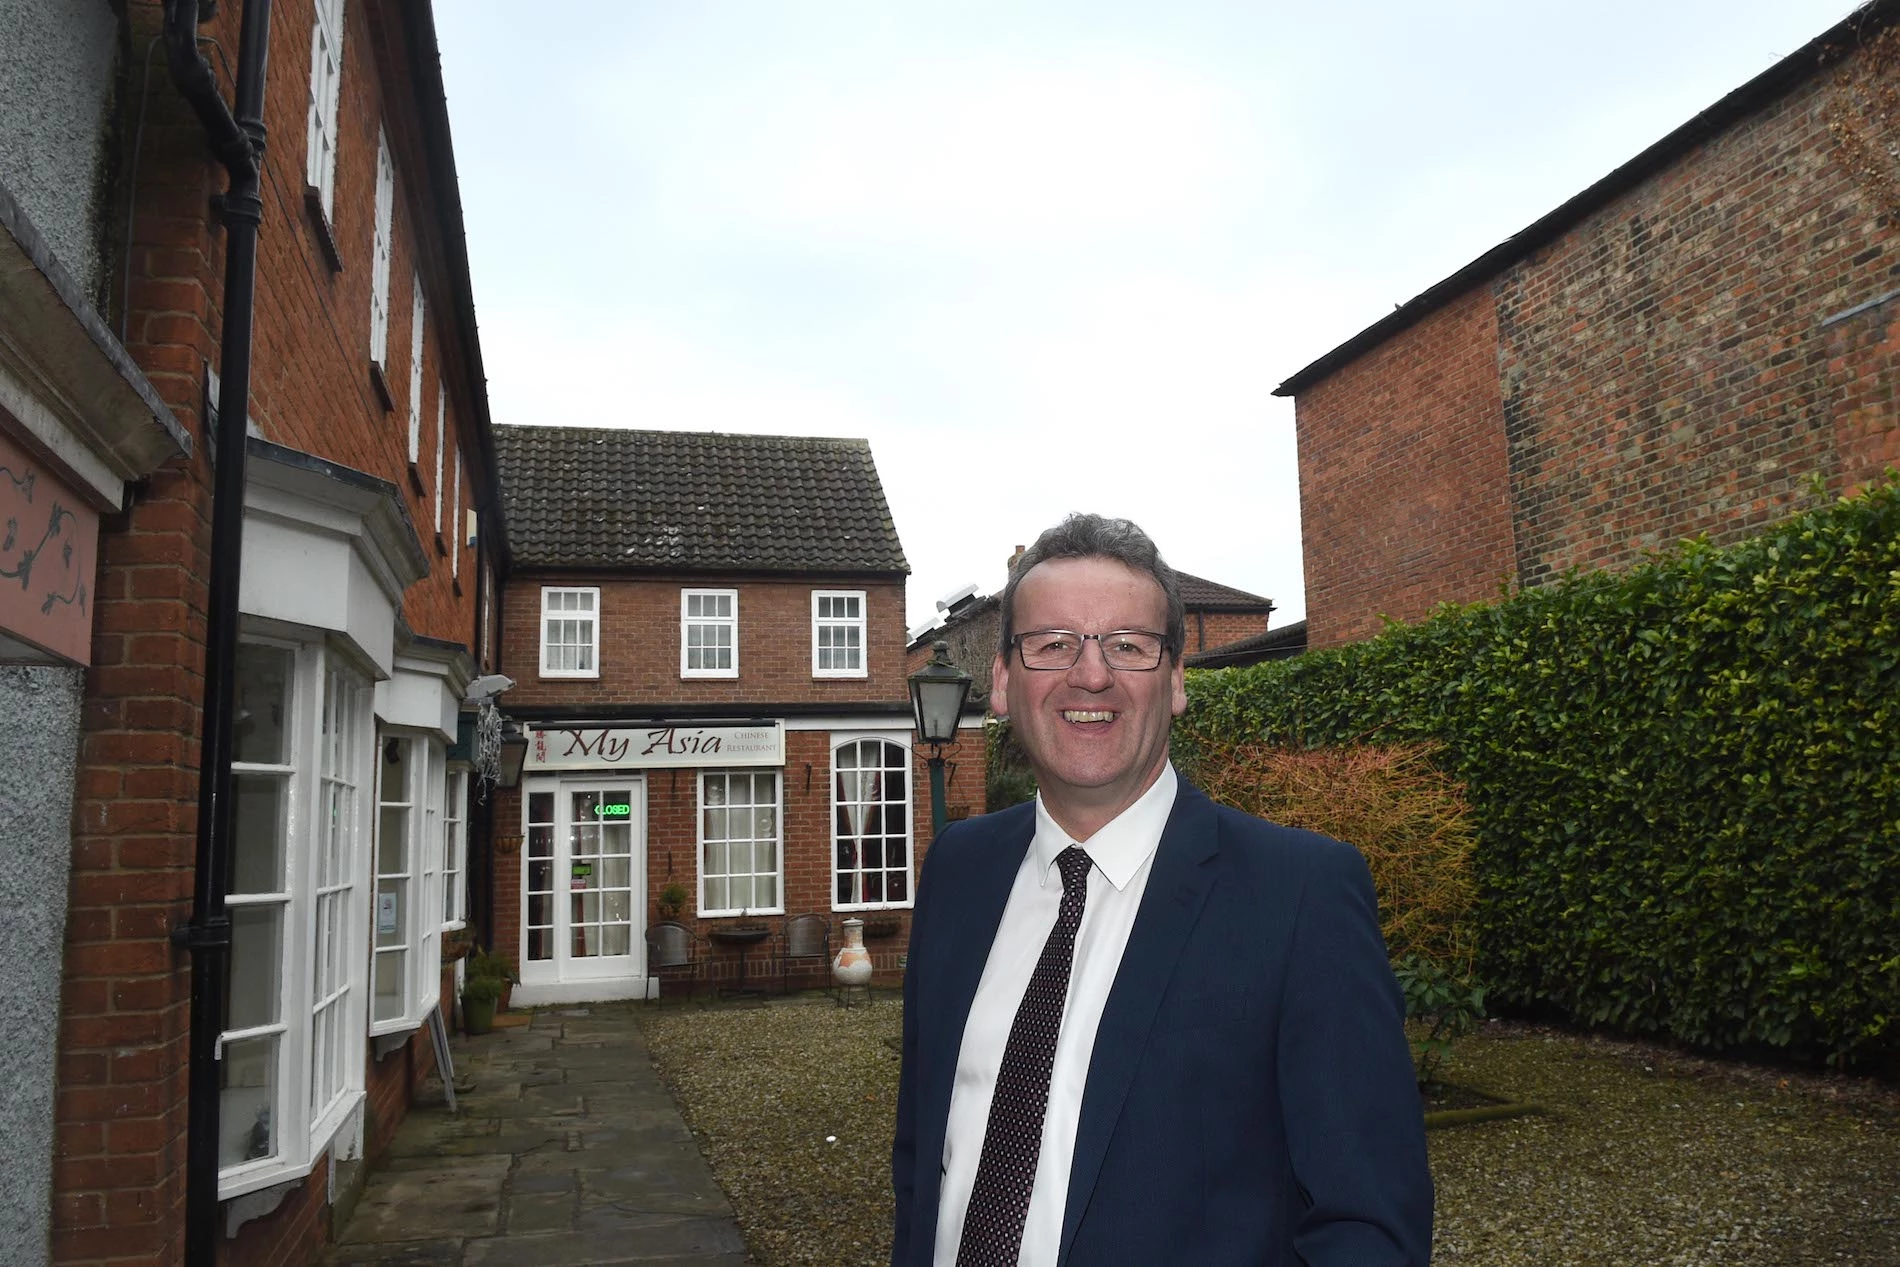 Mandale property head Joe Darragh has revealed plans to revitalise Northallerton town centre with the creation of a new shopping arcade at Regency Mews.